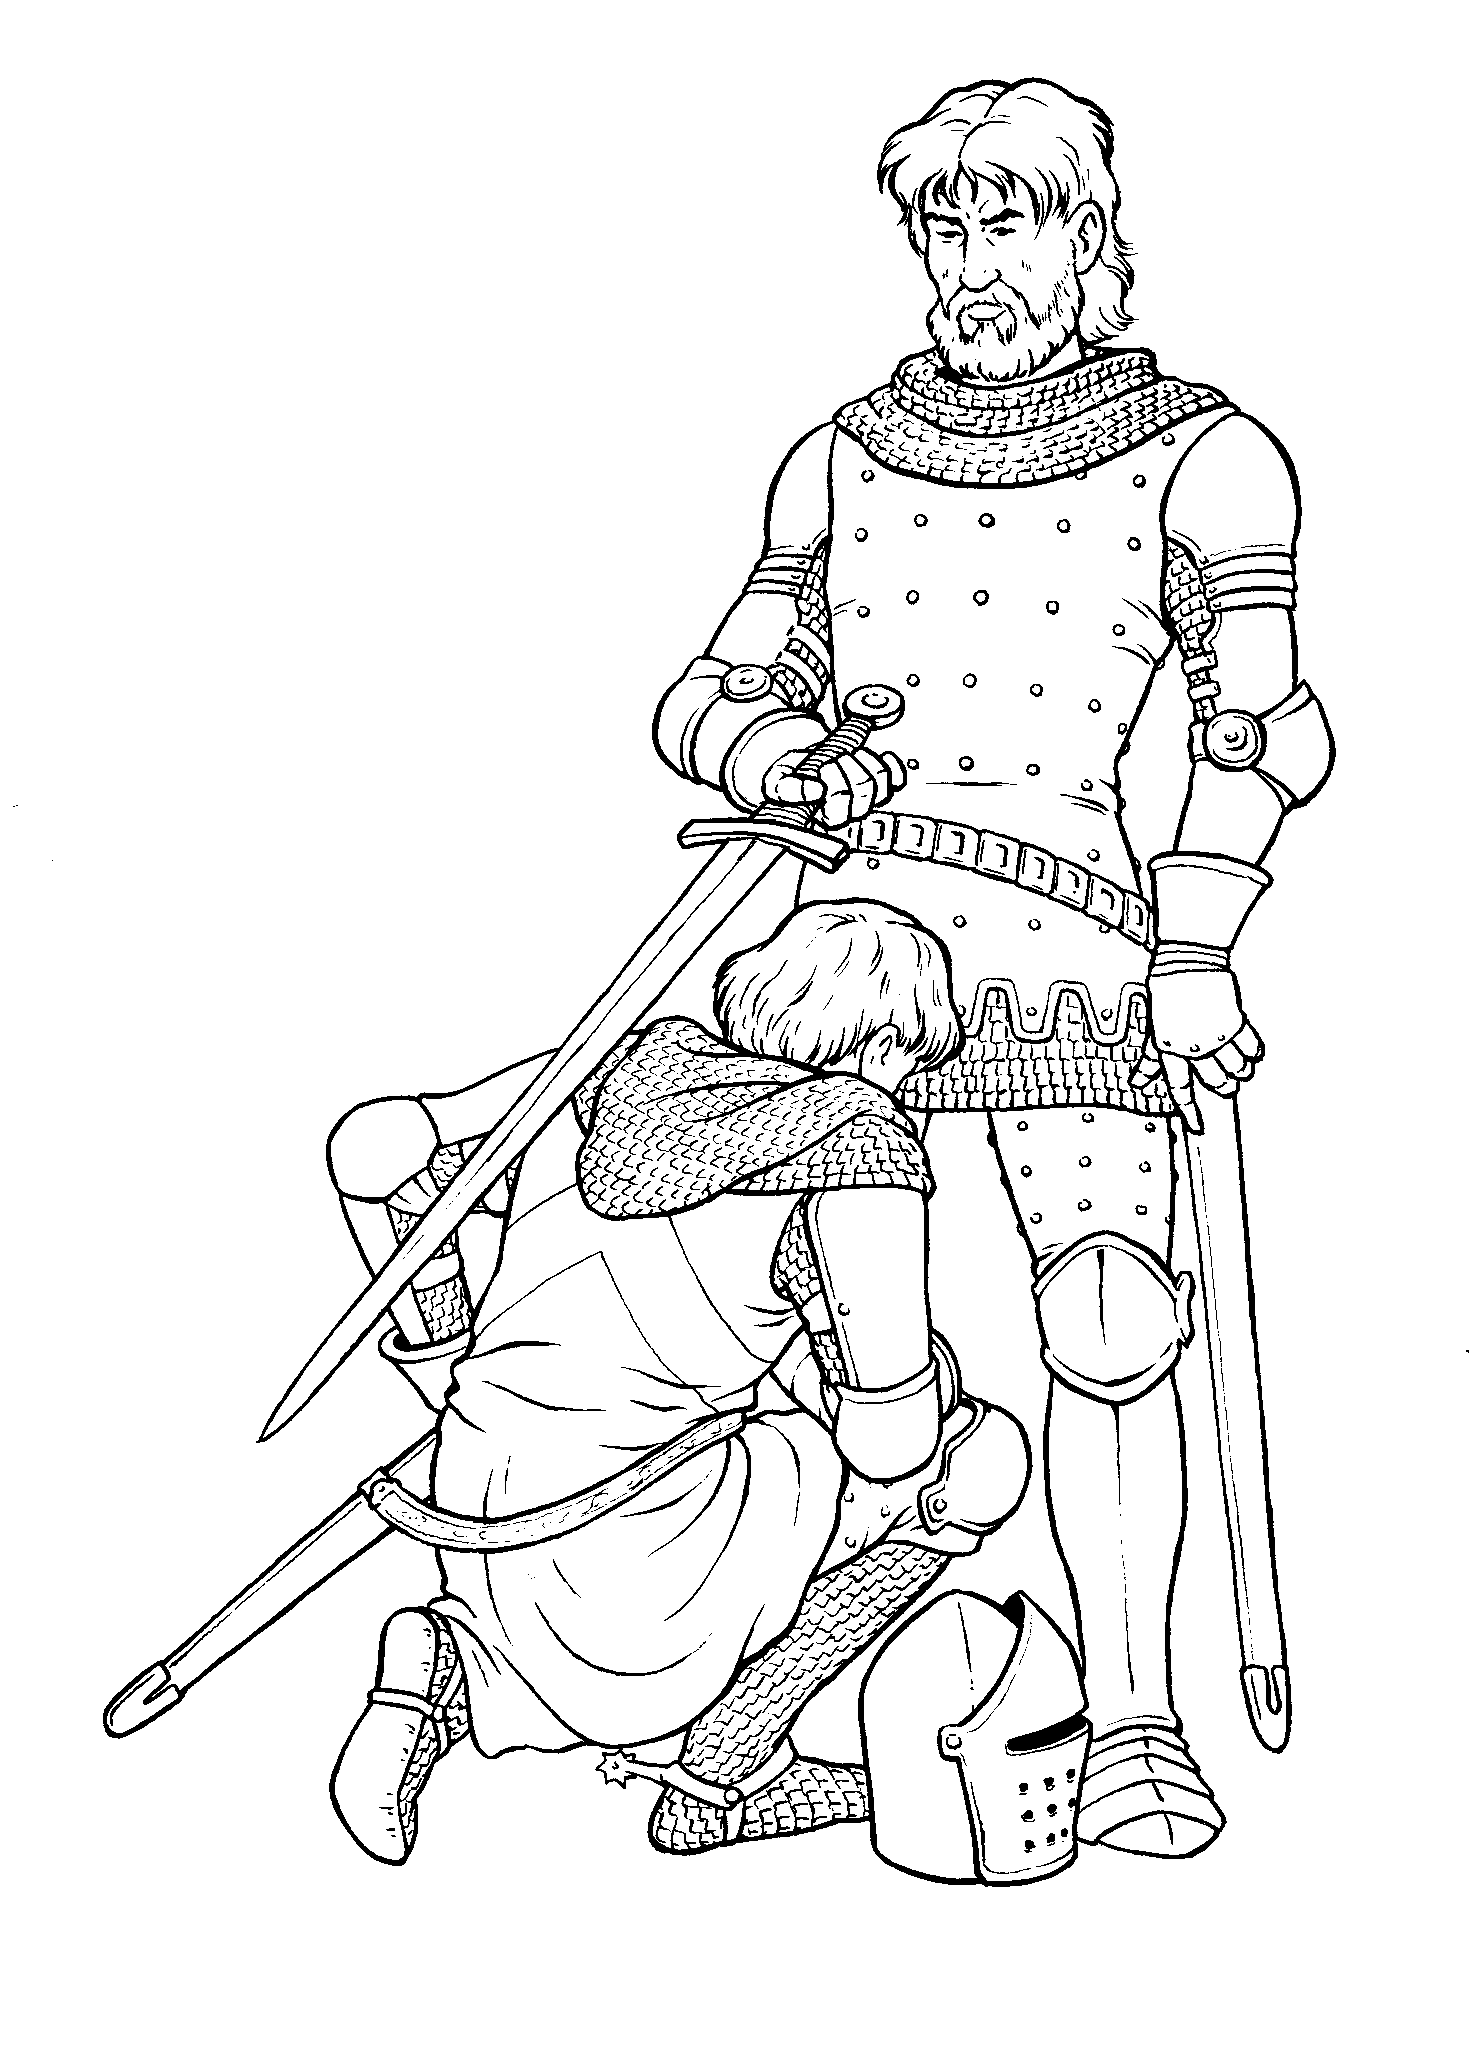 Coloring page - Knighted